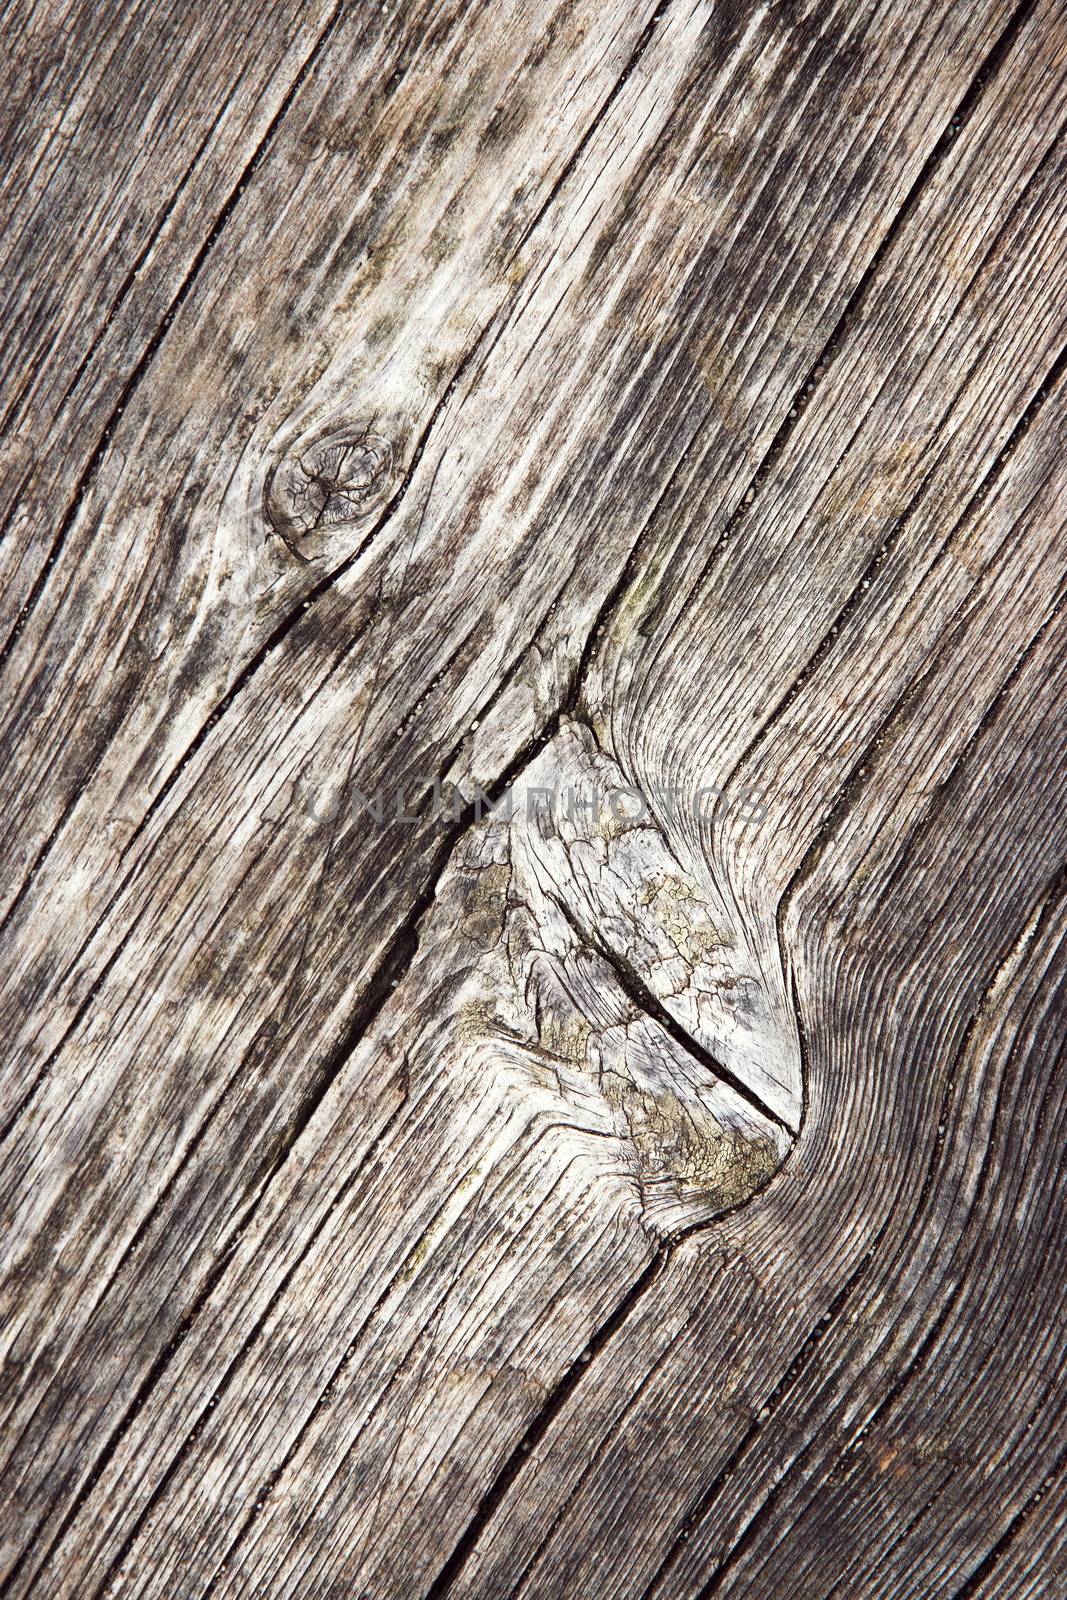 bump shapes on old weathered wood by Ahojdoma